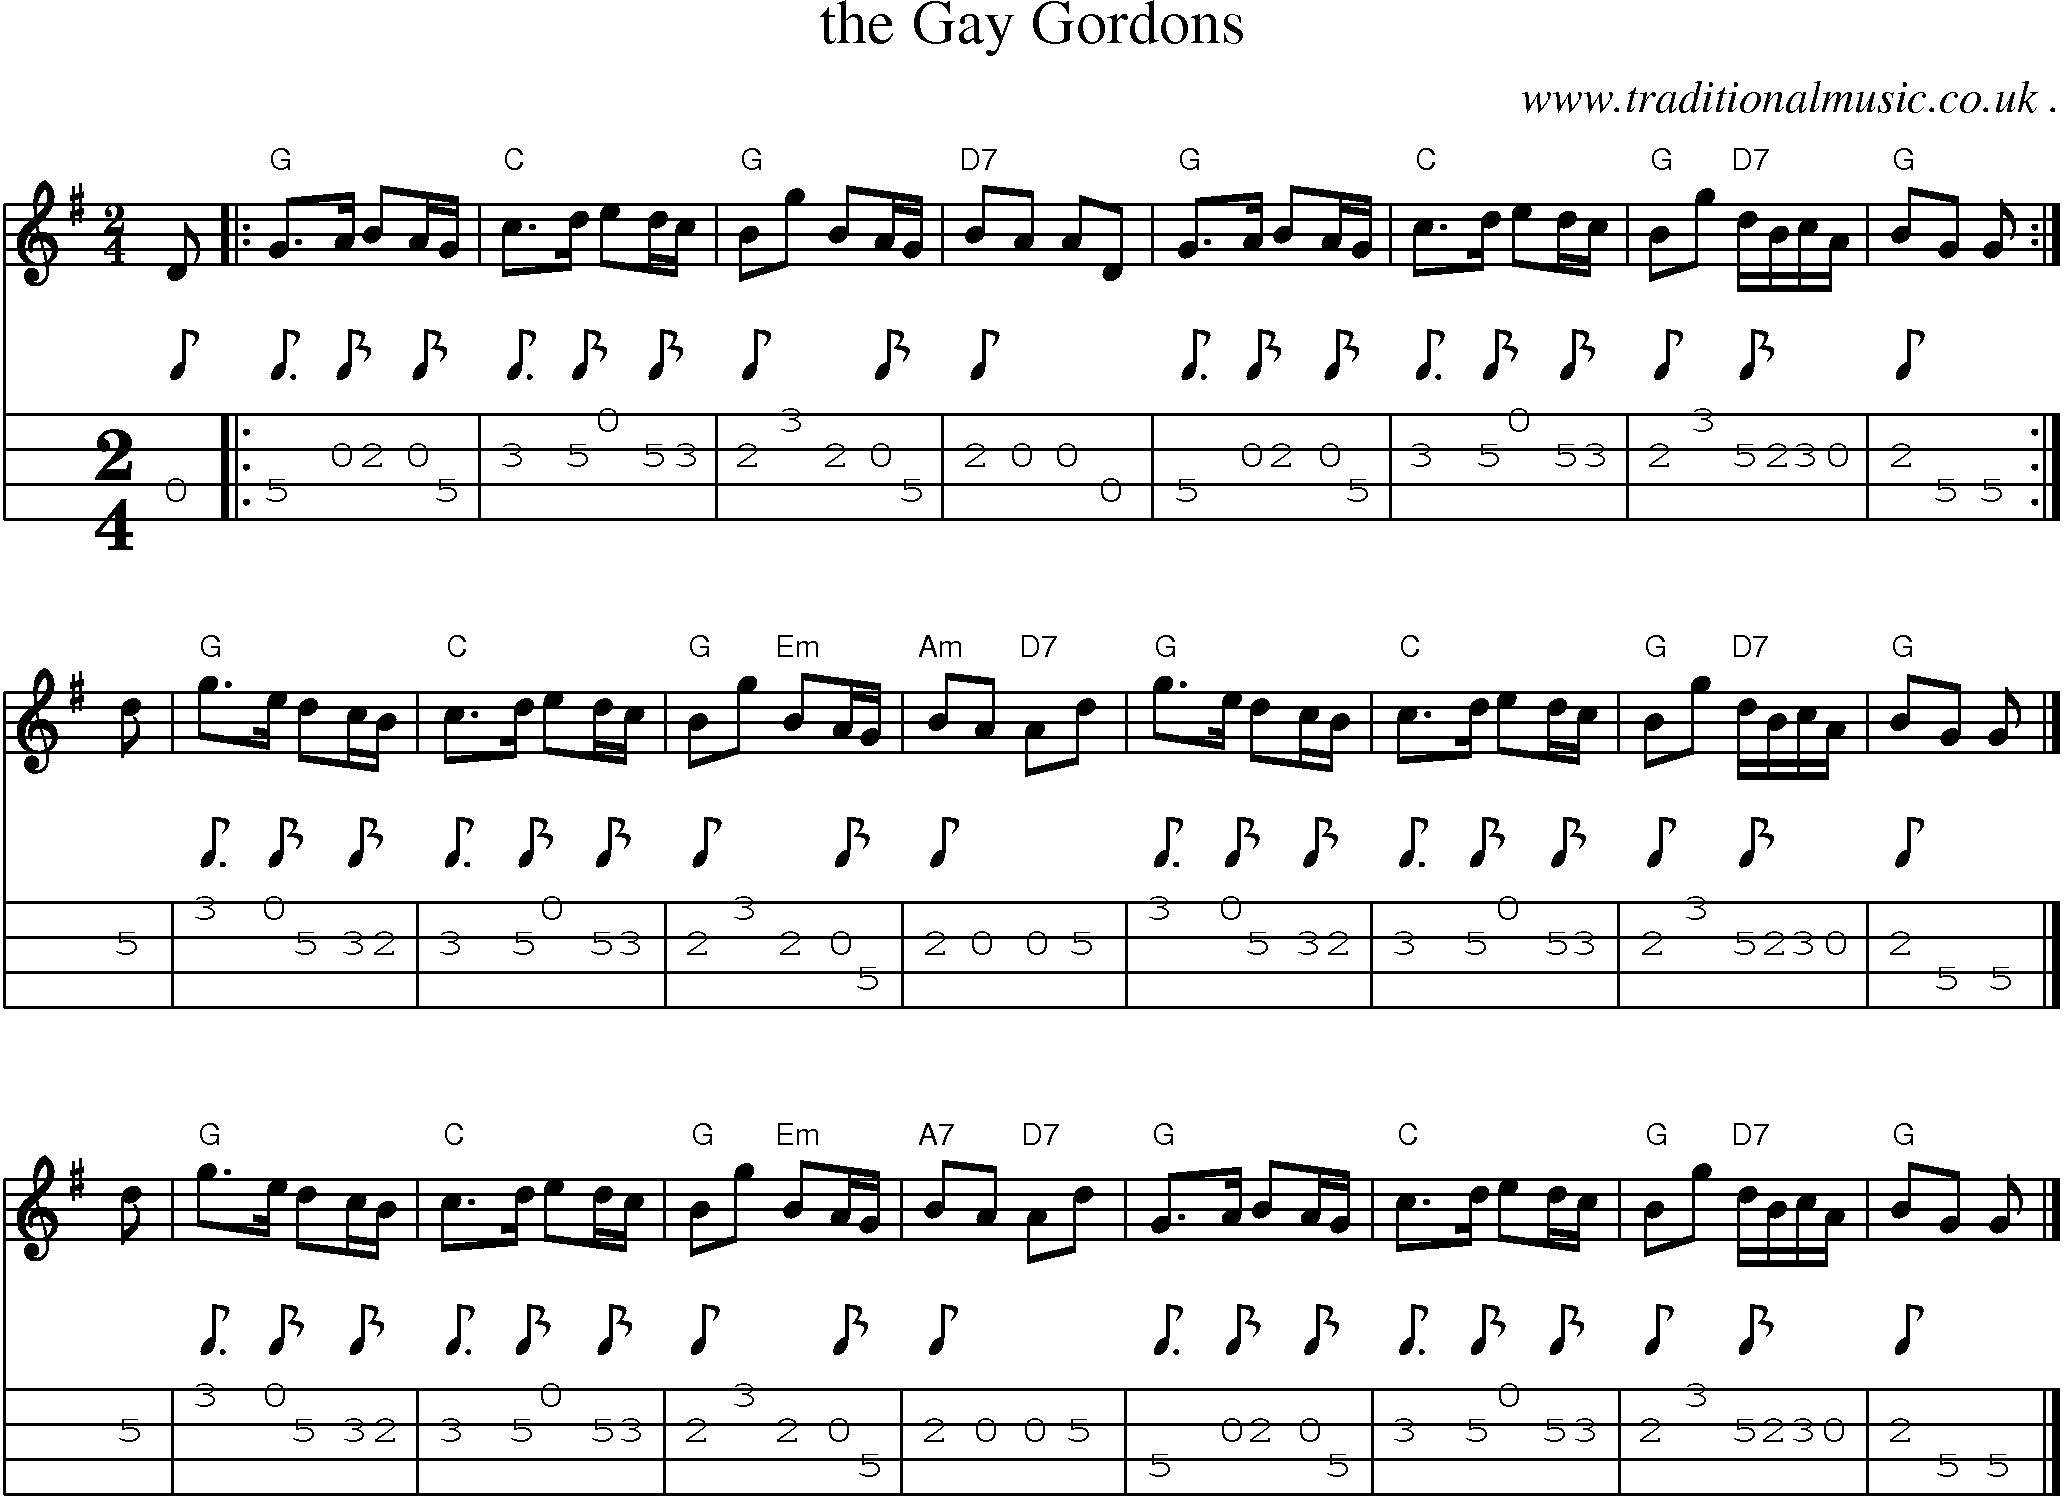 Sheet-music  score, Chords and Mandolin Tabs for The Gay Gordons